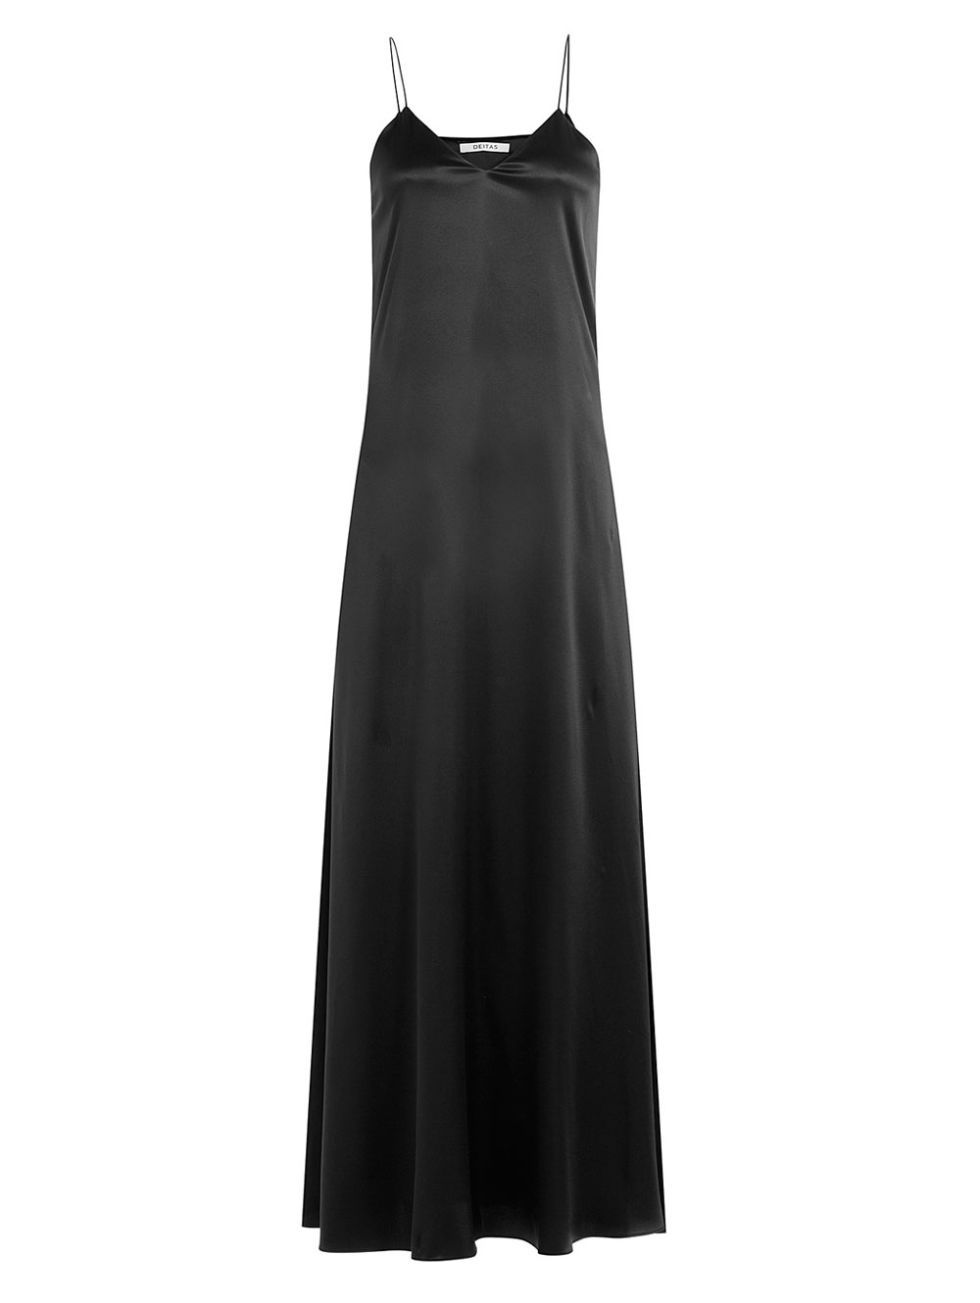 Dress, One-piece garment, Style, Clothes hanger, Formal wear, Black, Day dress, Gown, Black-and-white, Fashion design, 